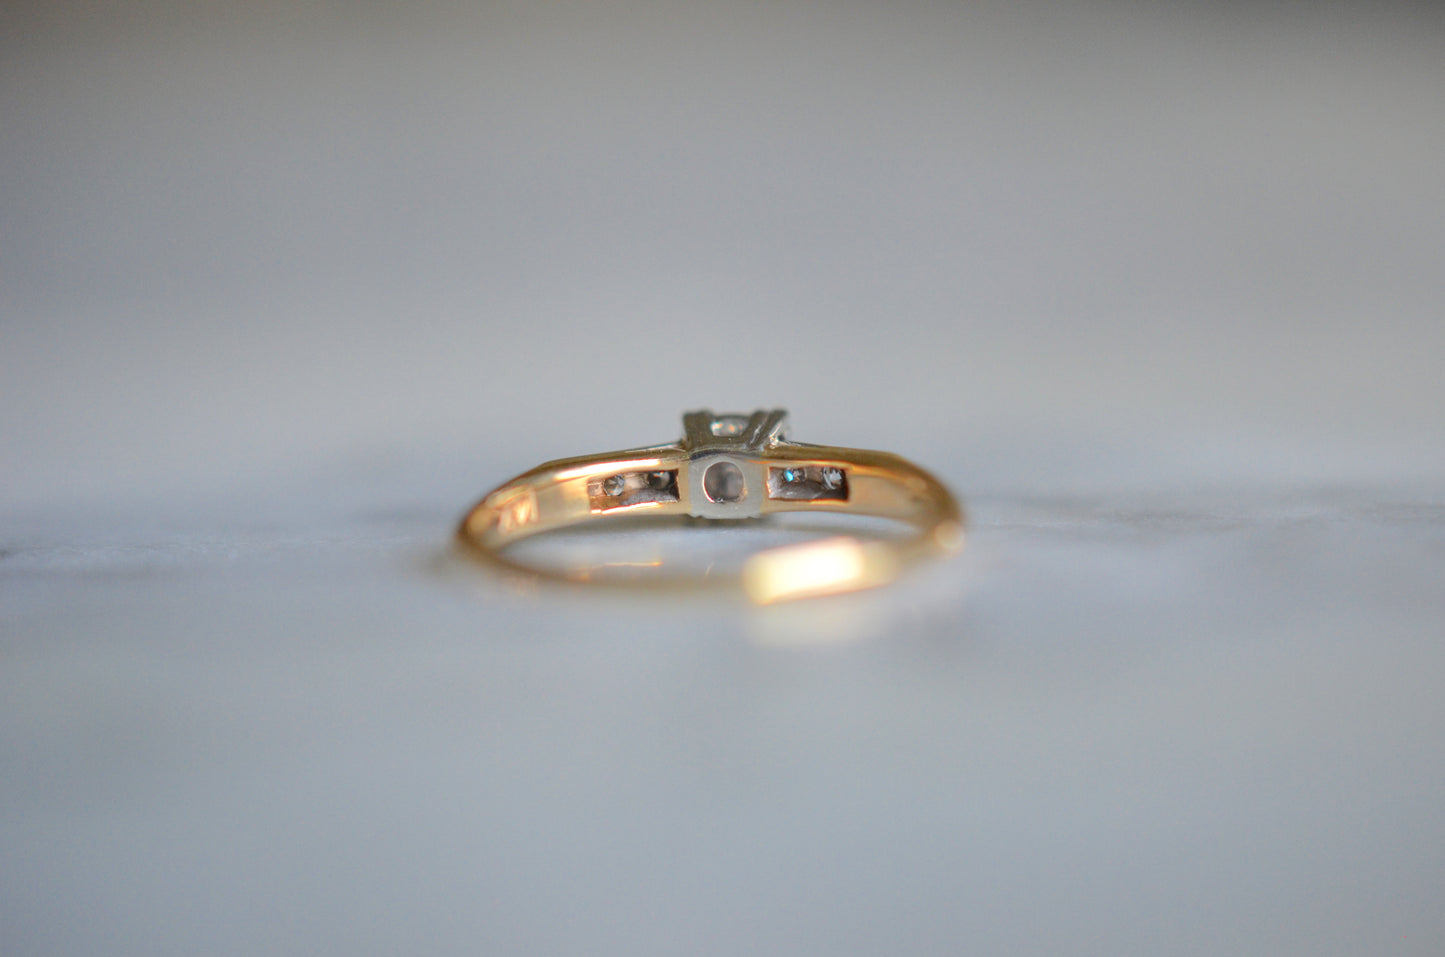 Modest Wartime Engagement Ring